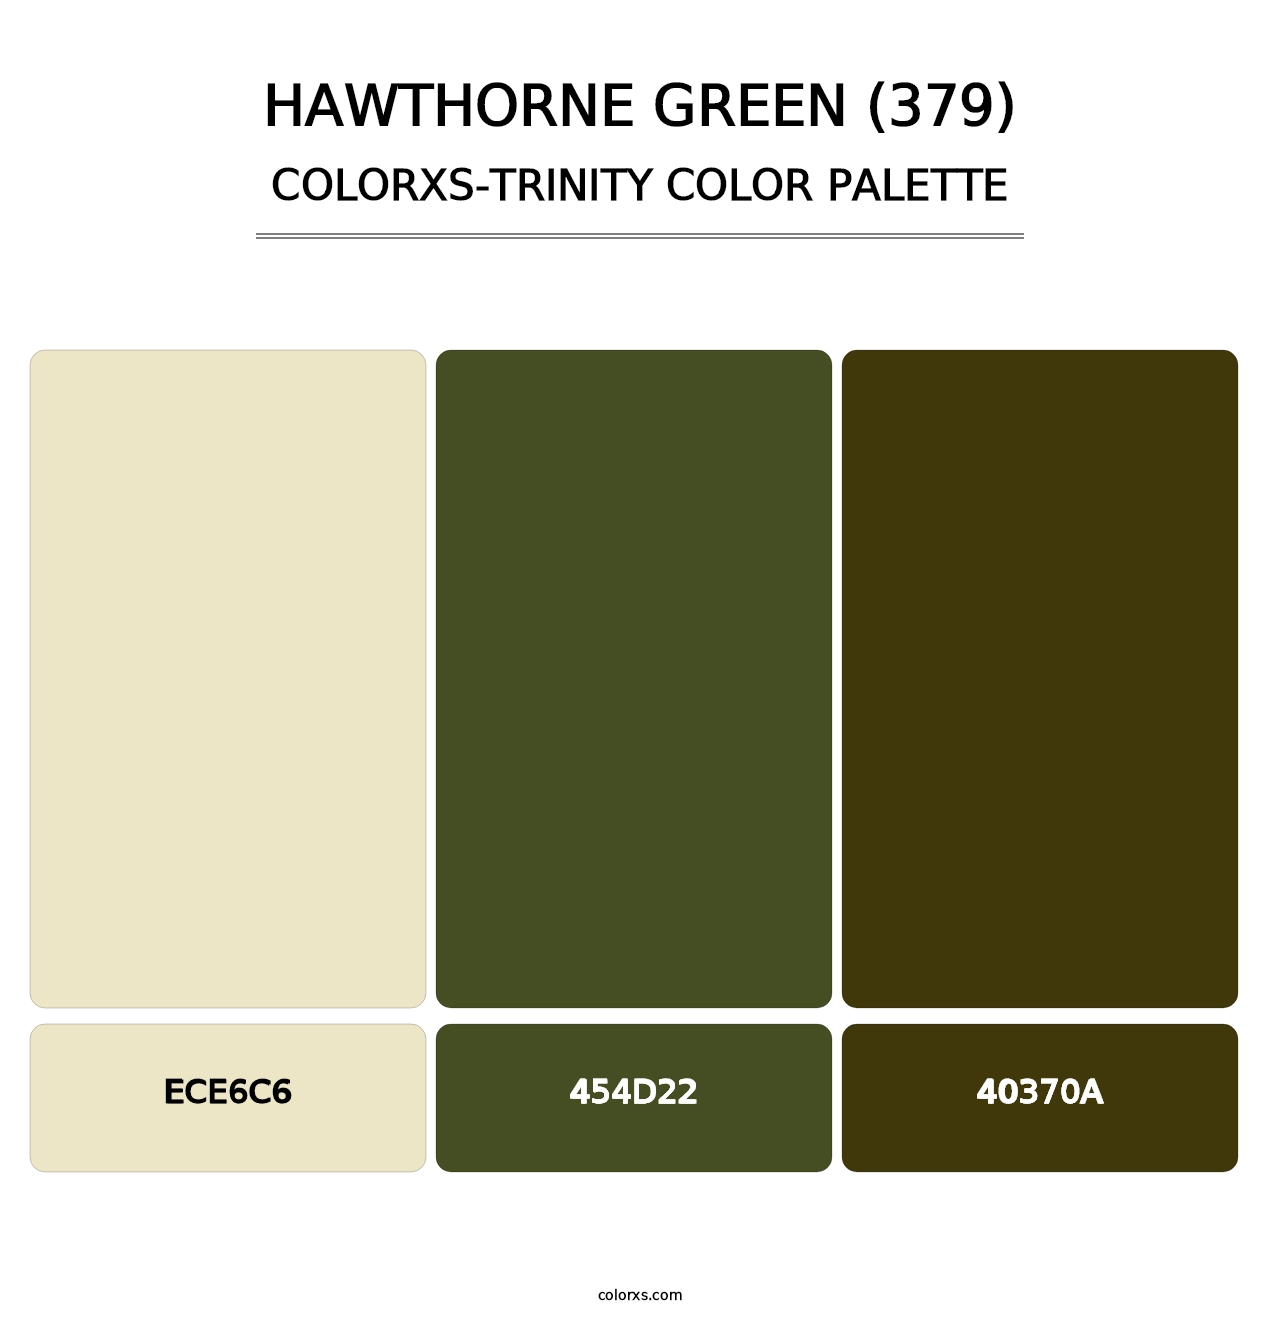 Hawthorne Green (379) - Colorxs Trinity Palette